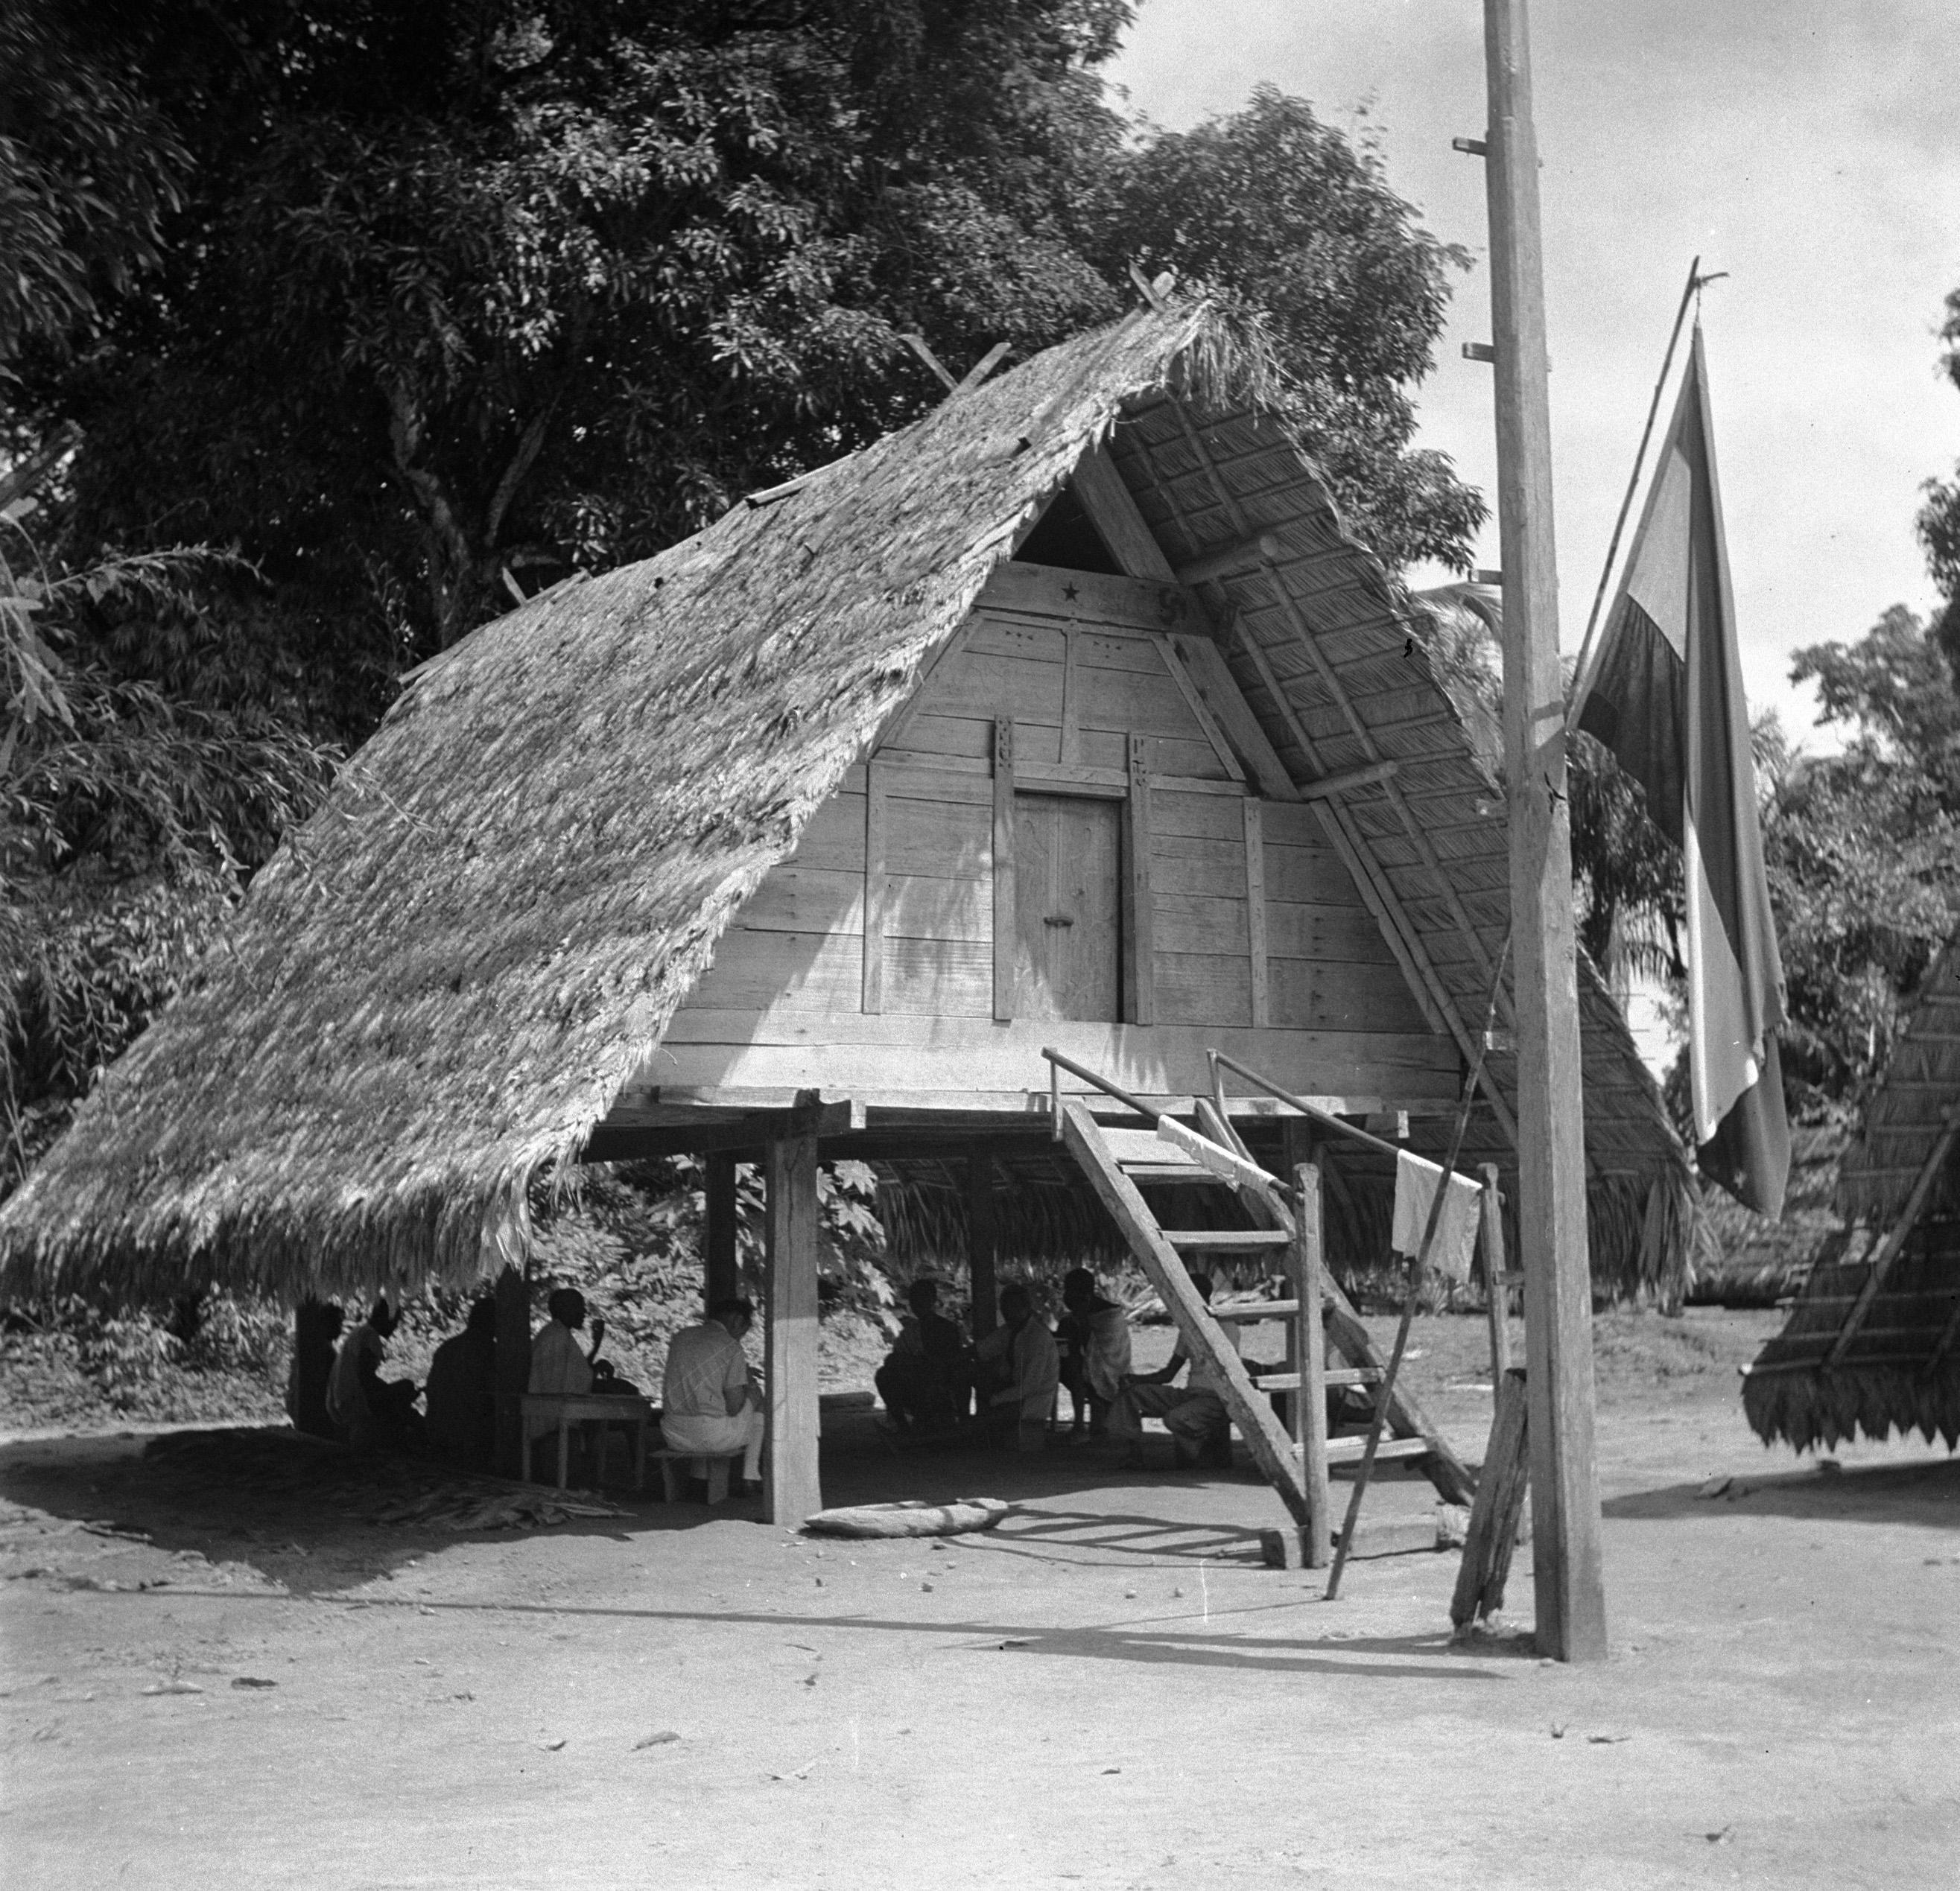 The Paramaccan or Paramaka (French: Pamak) are a Maroon tribe living in the forested interior of Suriname, mainly in the Paramacca resort, and the western border area of French Guiana. The Paramaccan signed a peace treaty in 1872 granting the tribe autonomy.